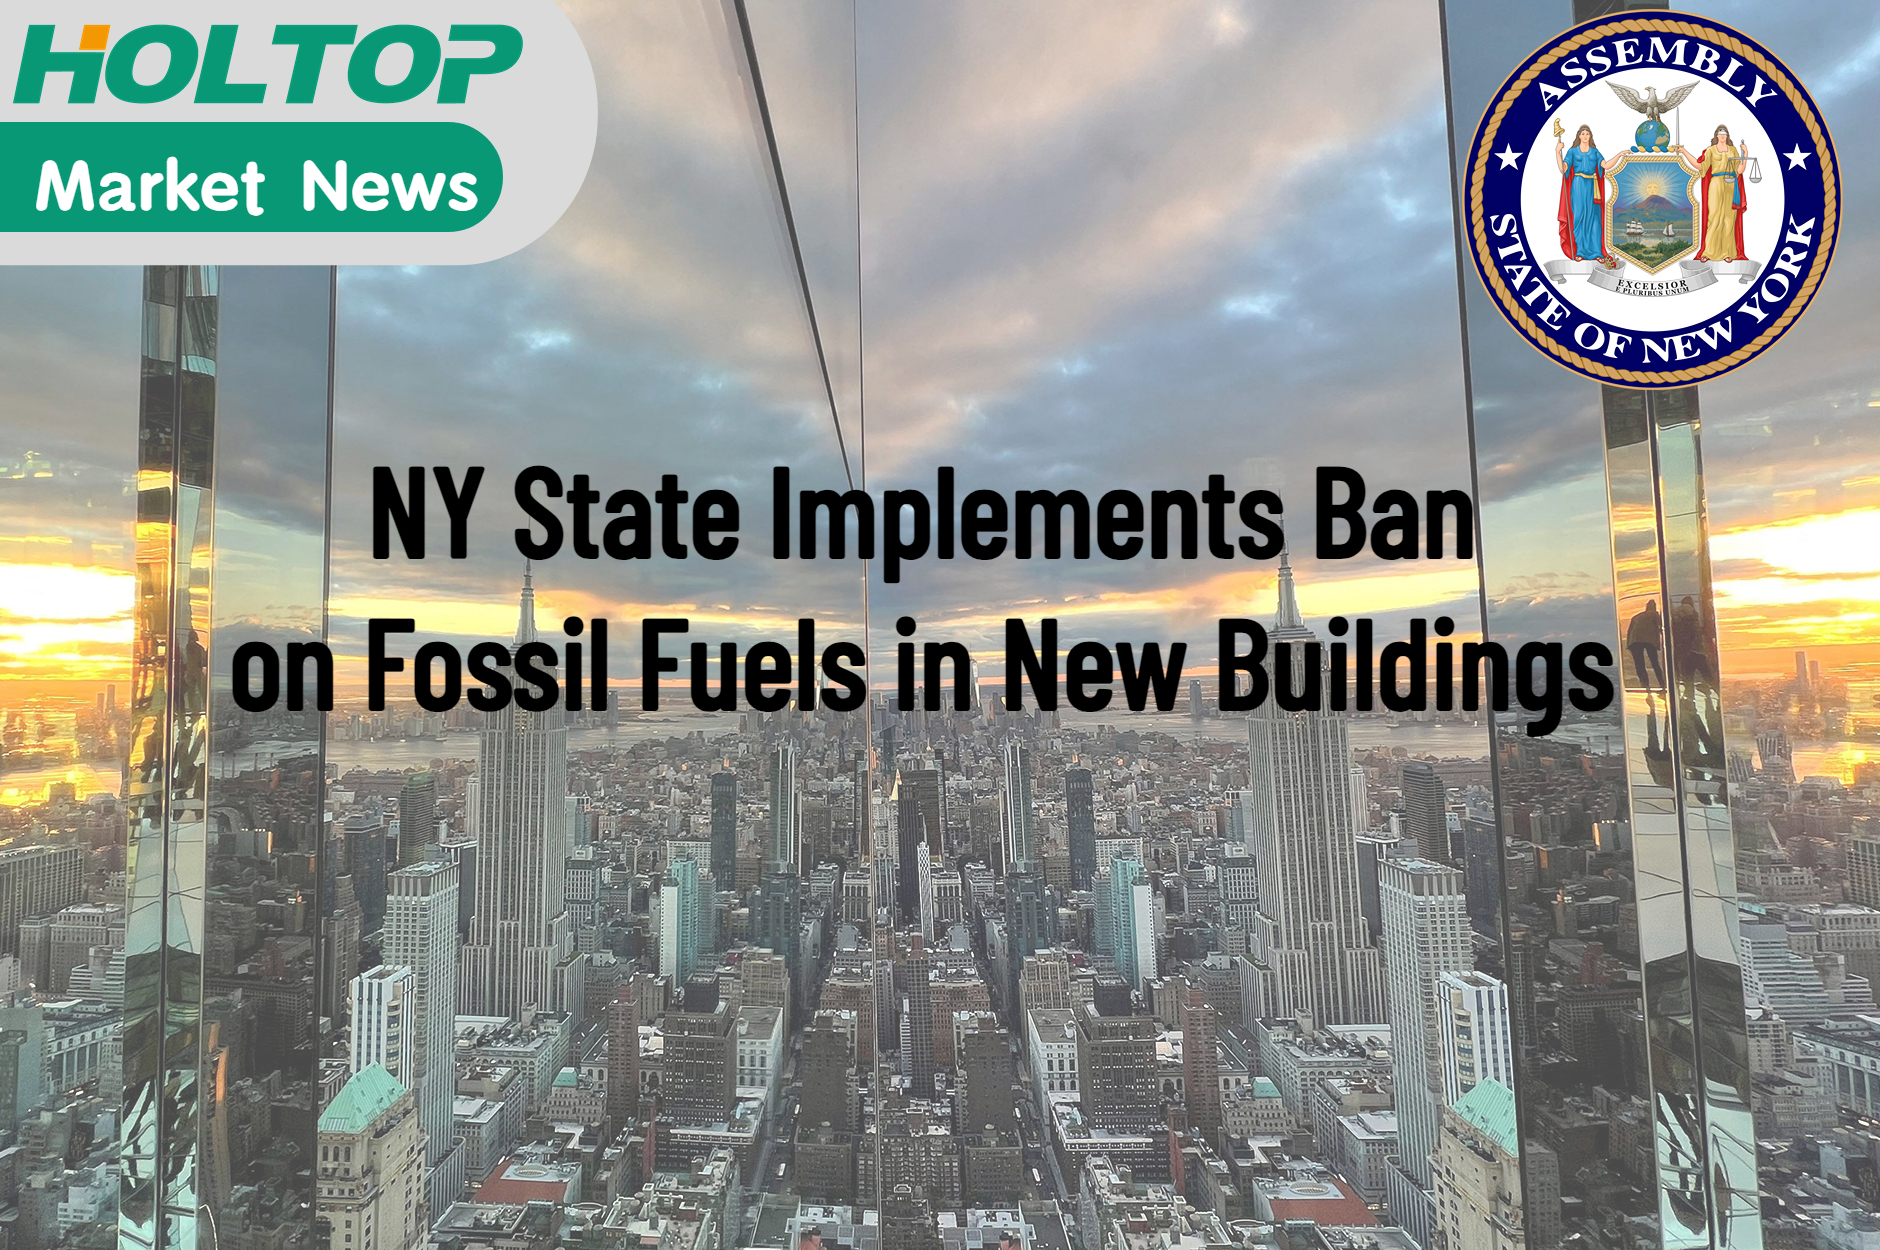 NY State Implements Ban on Fossil Fuels in New Buildings